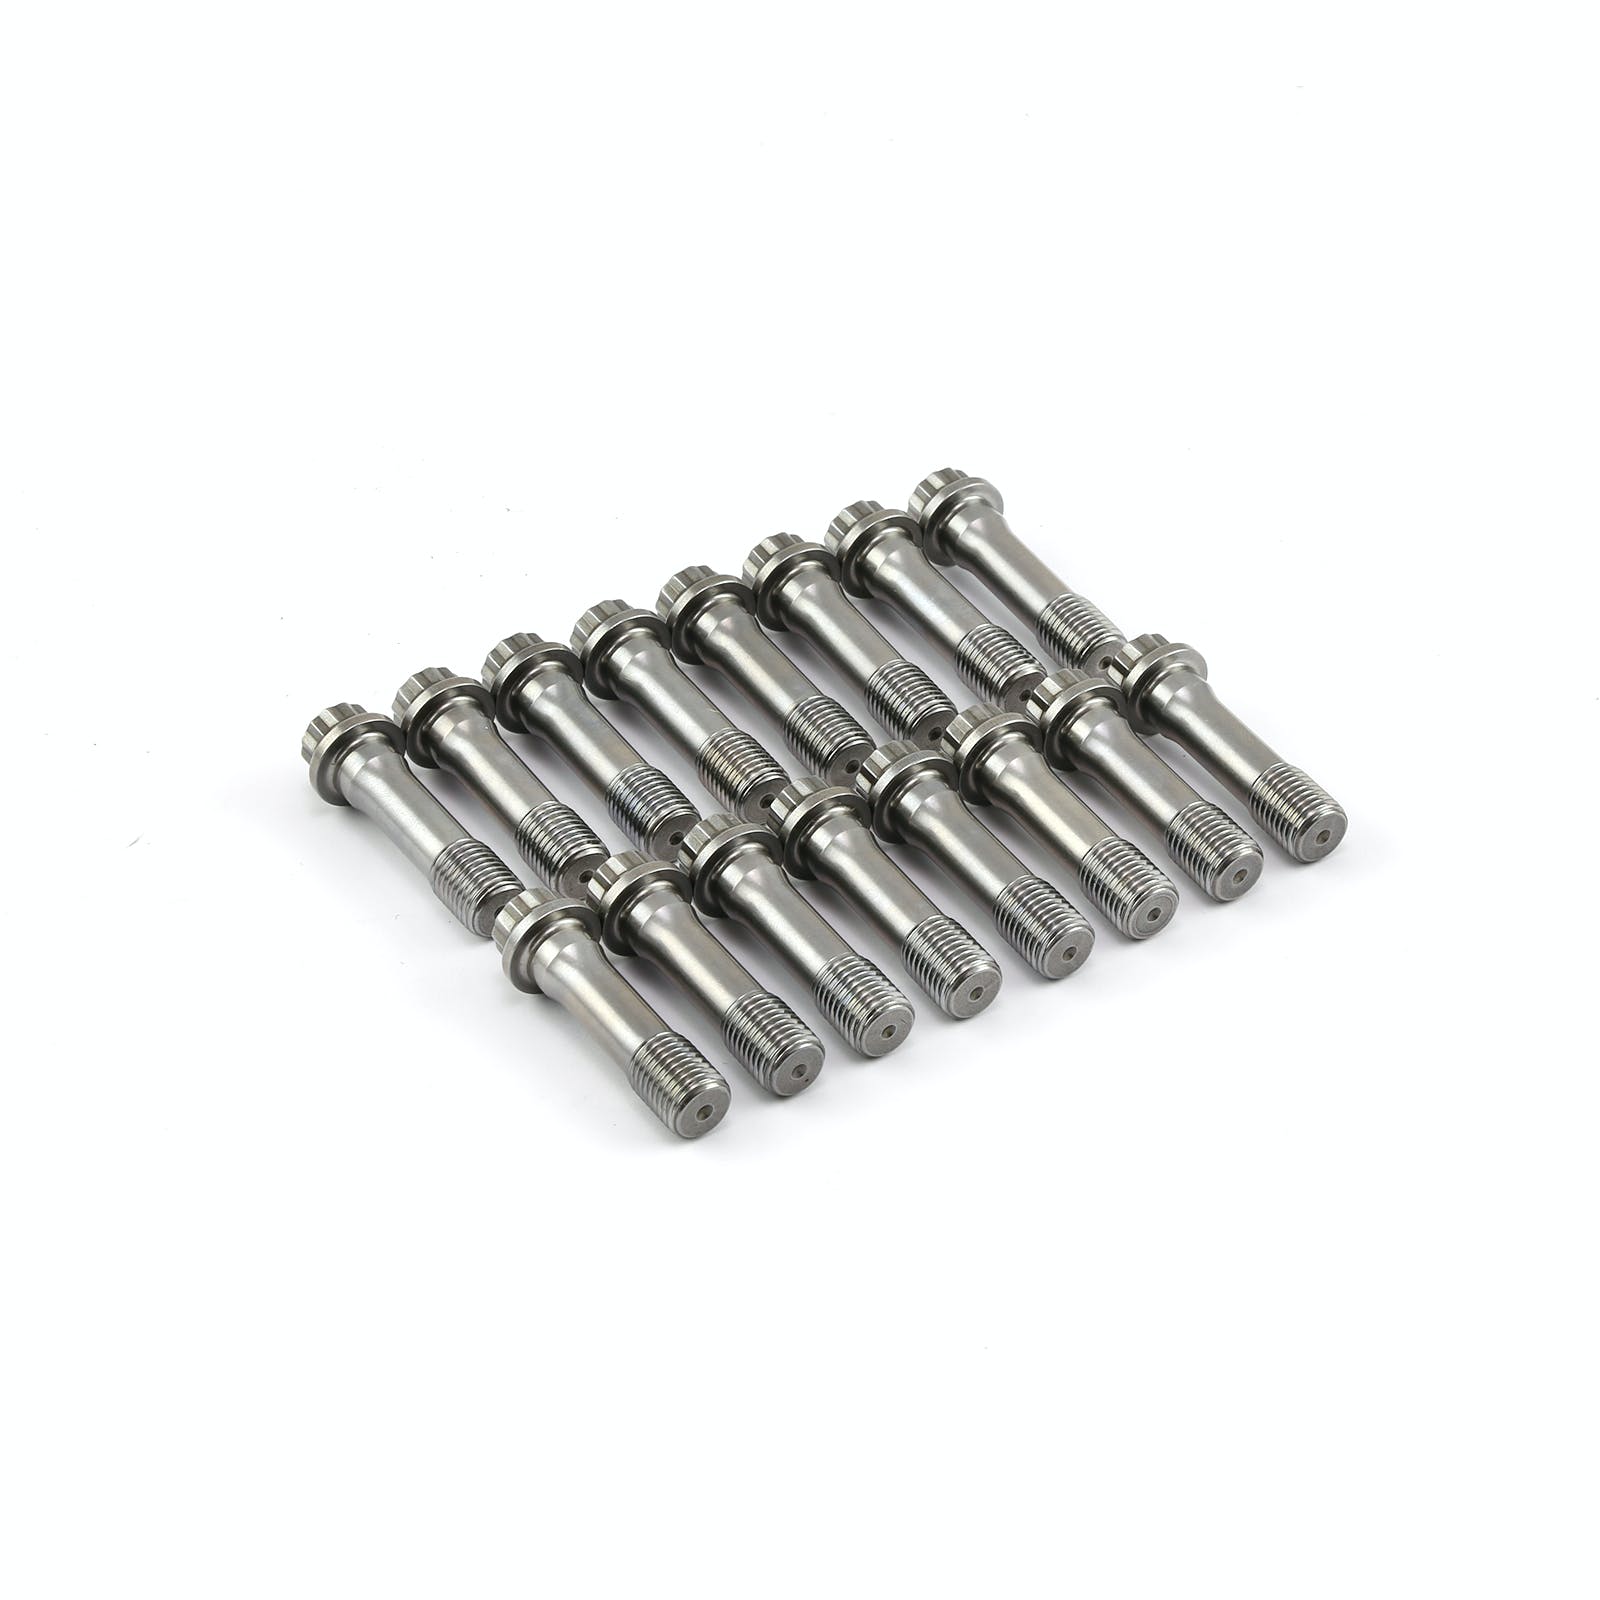 Speedmaster PCE275.1002 12 Point 7/16 1900-2000 Connecting Rod Bolts (16 Pcs)